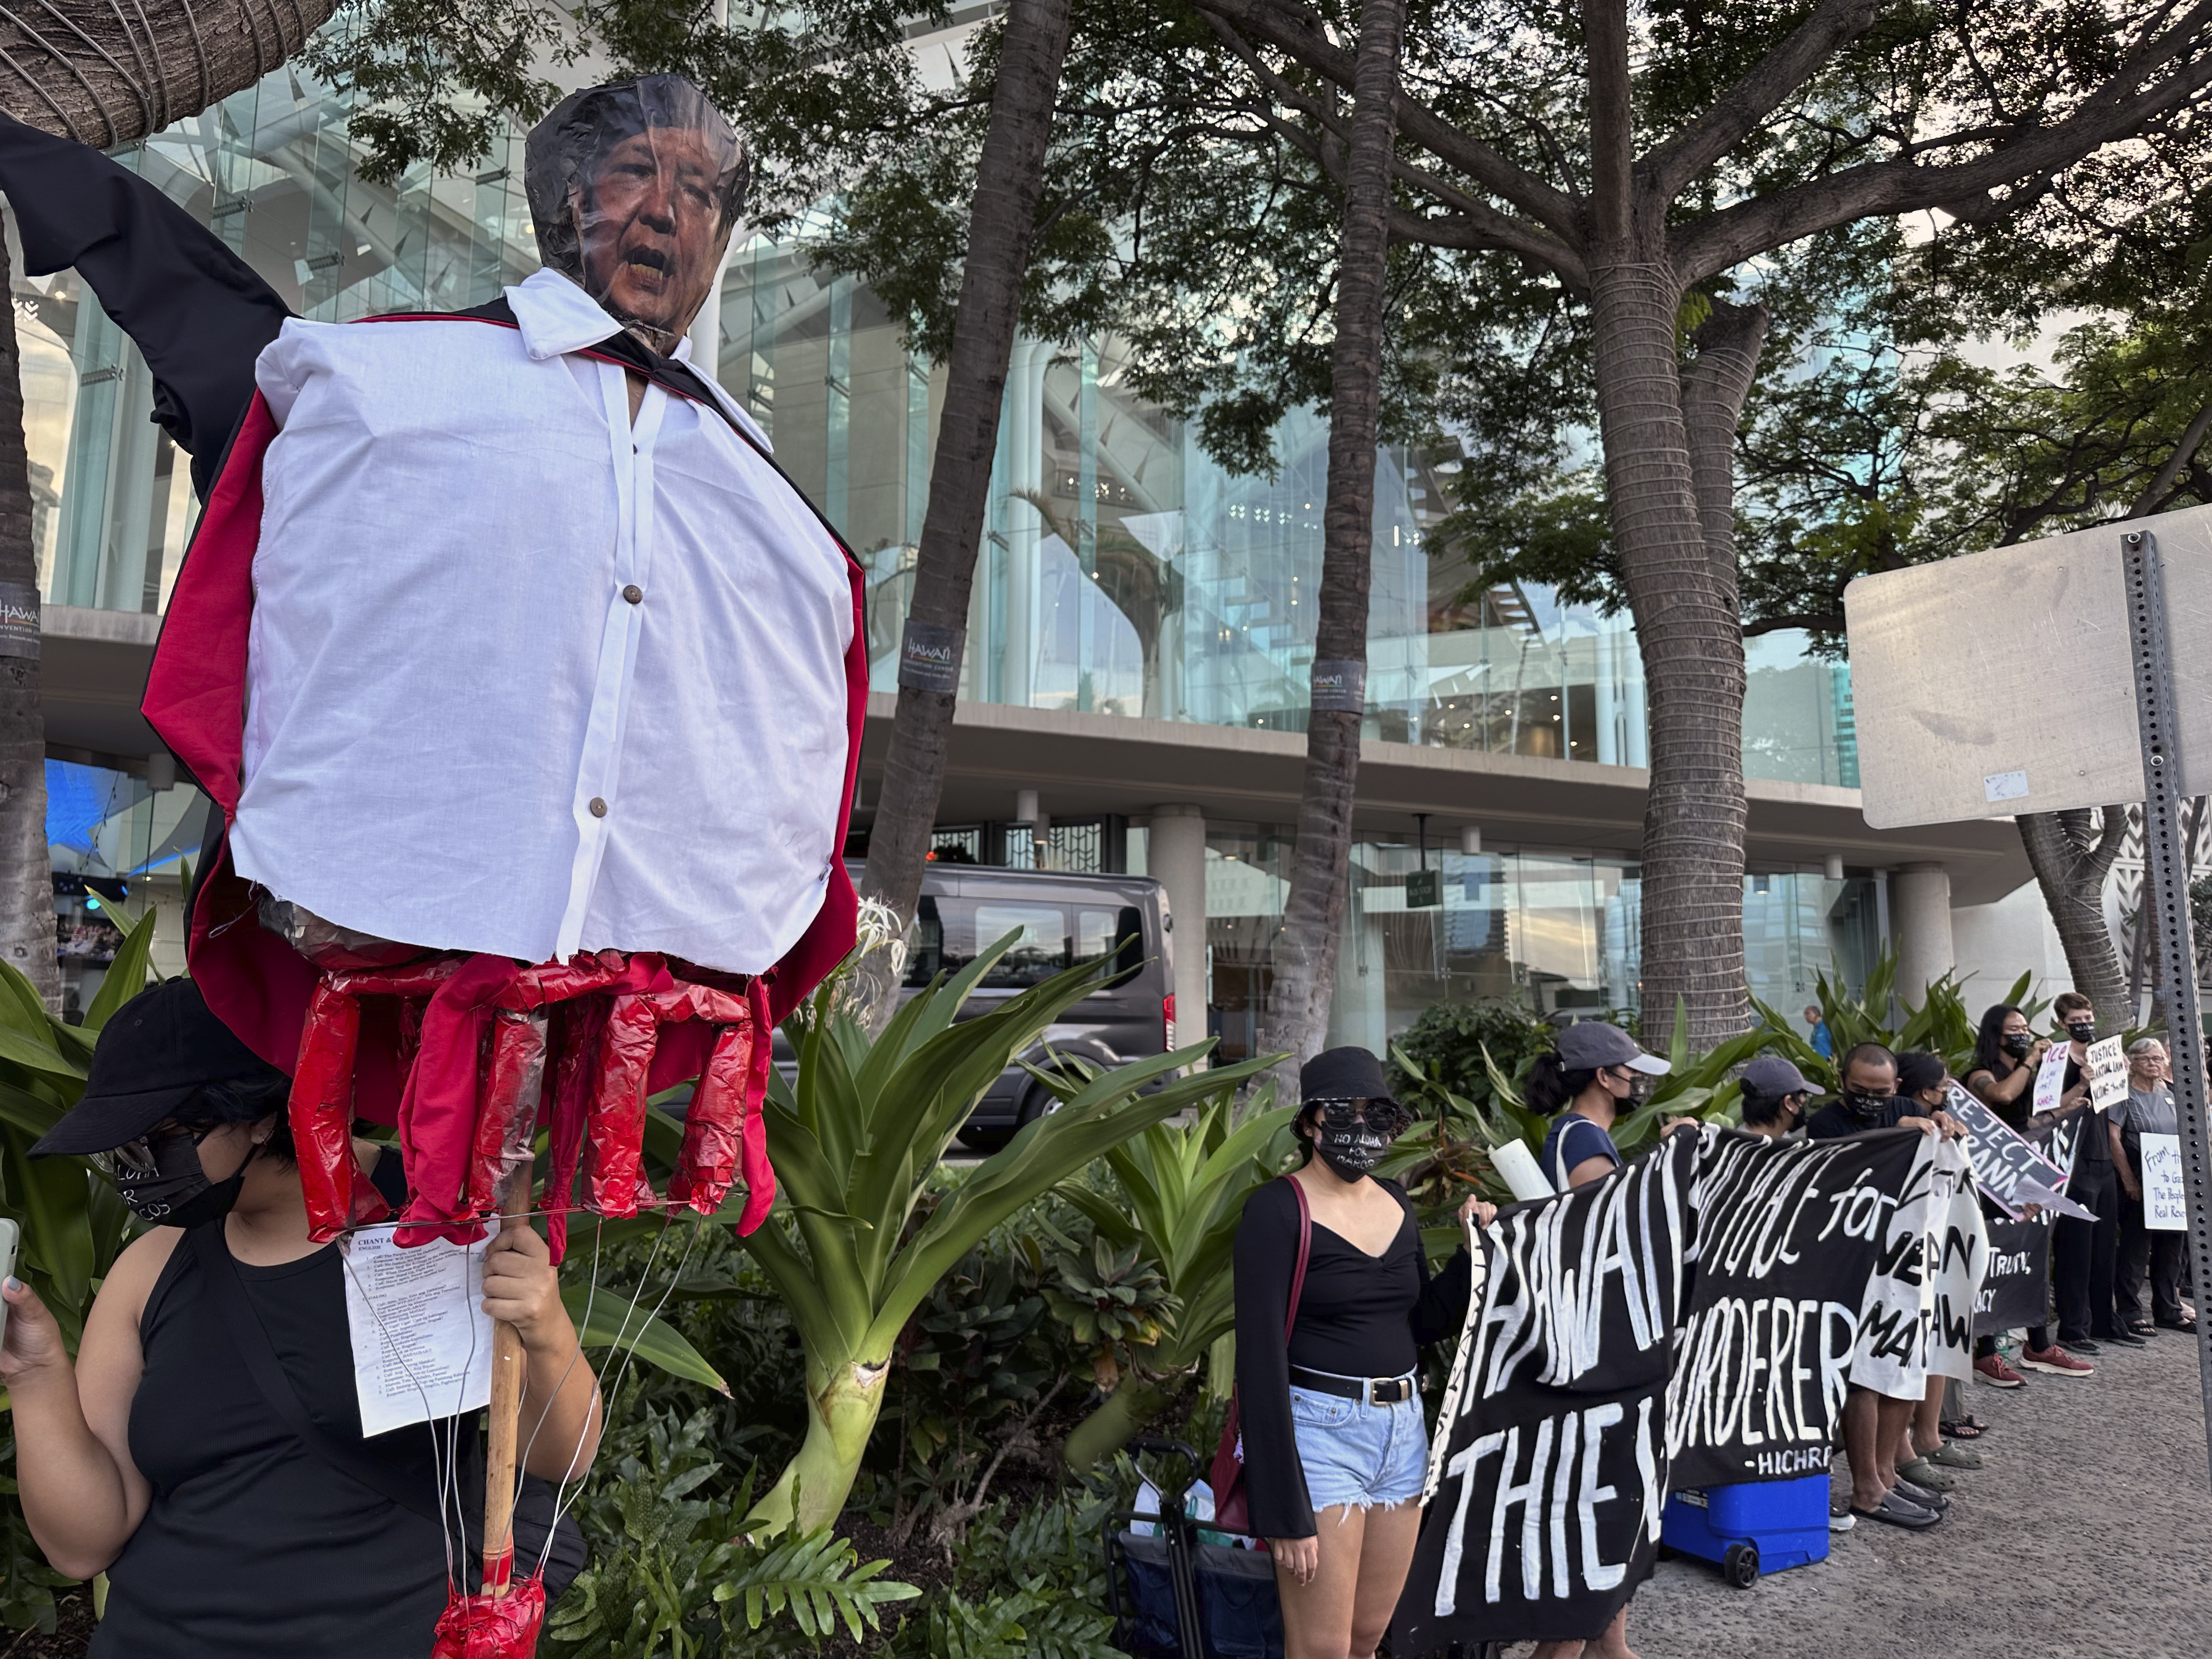 Filipino president's visit to Hawaii sparks protests and